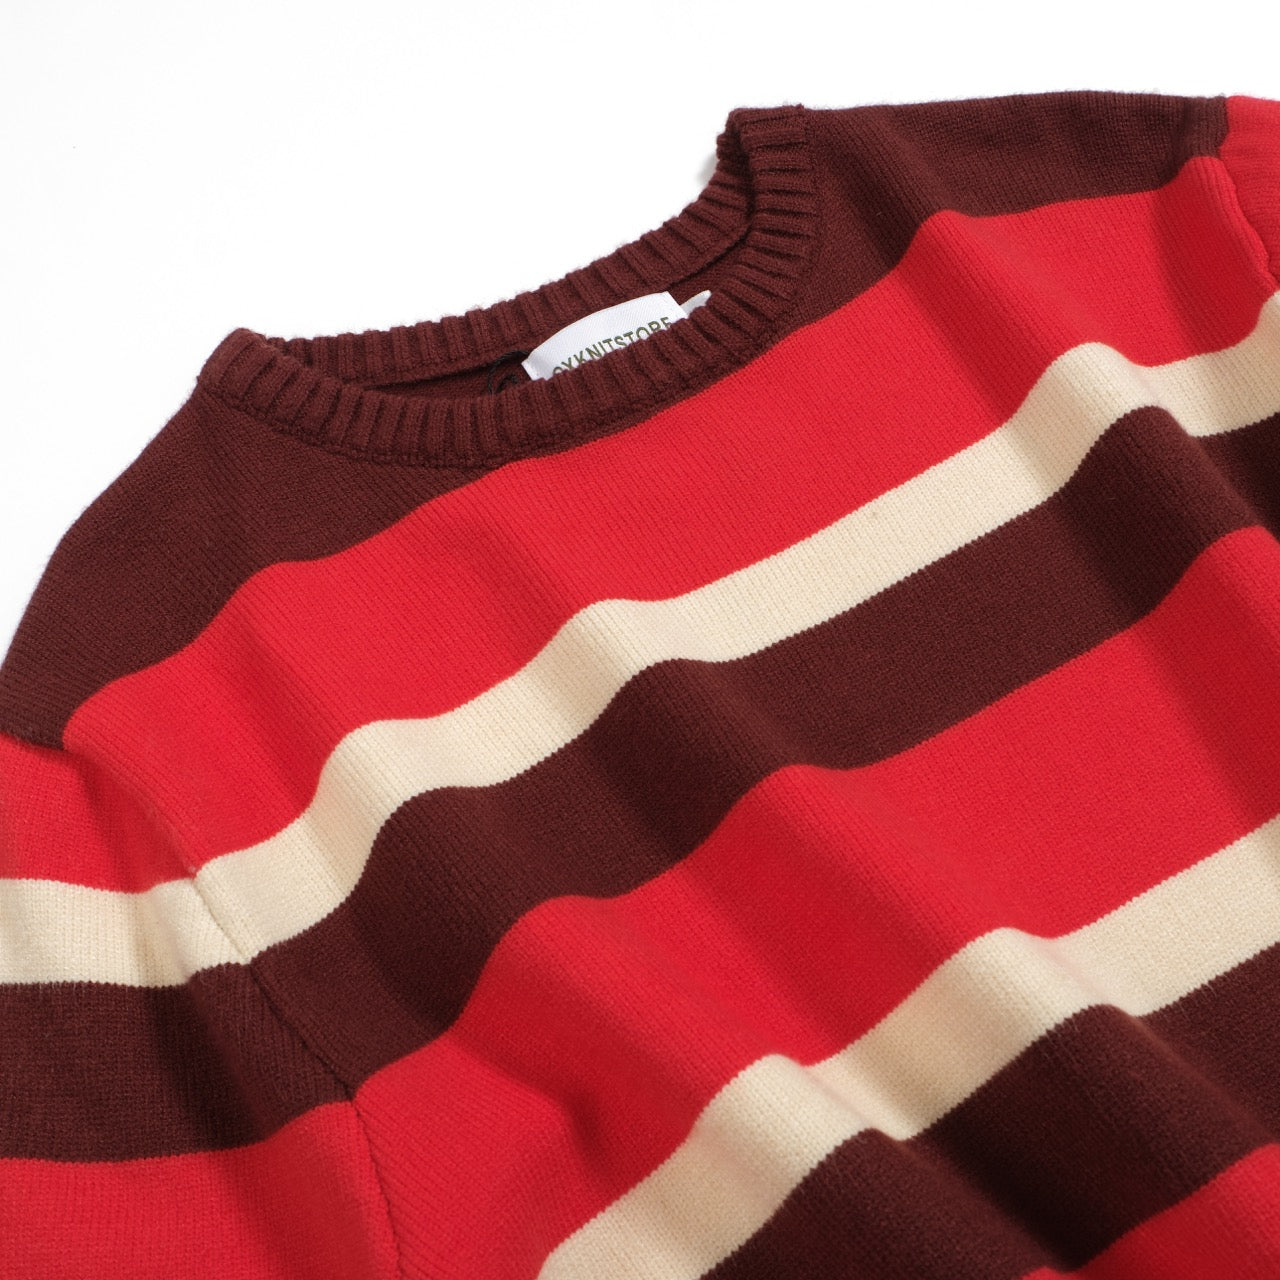 Men's Retro Wide Striped Knitted Red Sweater